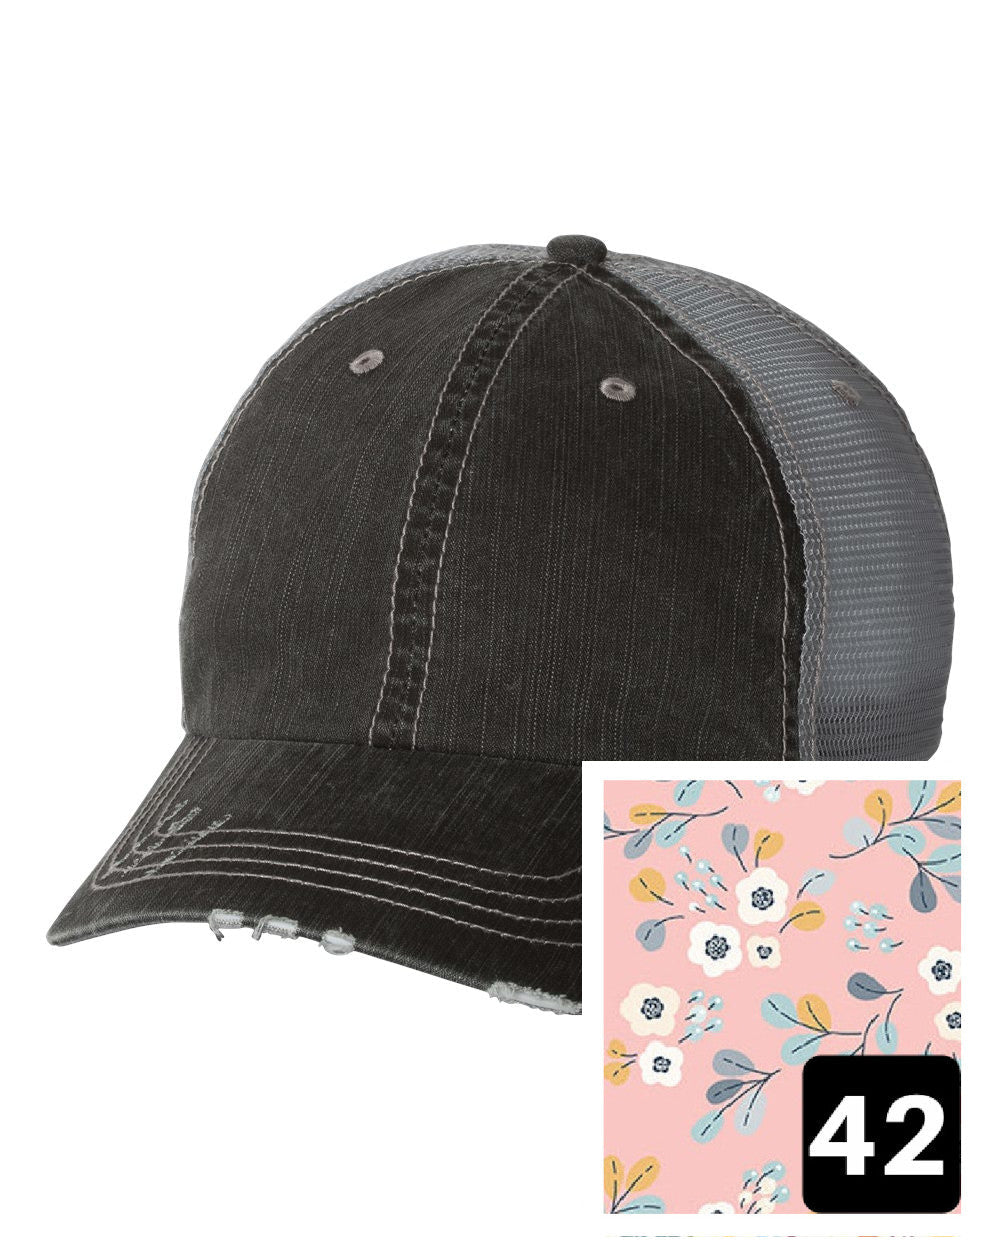 gray distressed trucker hat with light blue and pink mosaic fabric state of Virginia